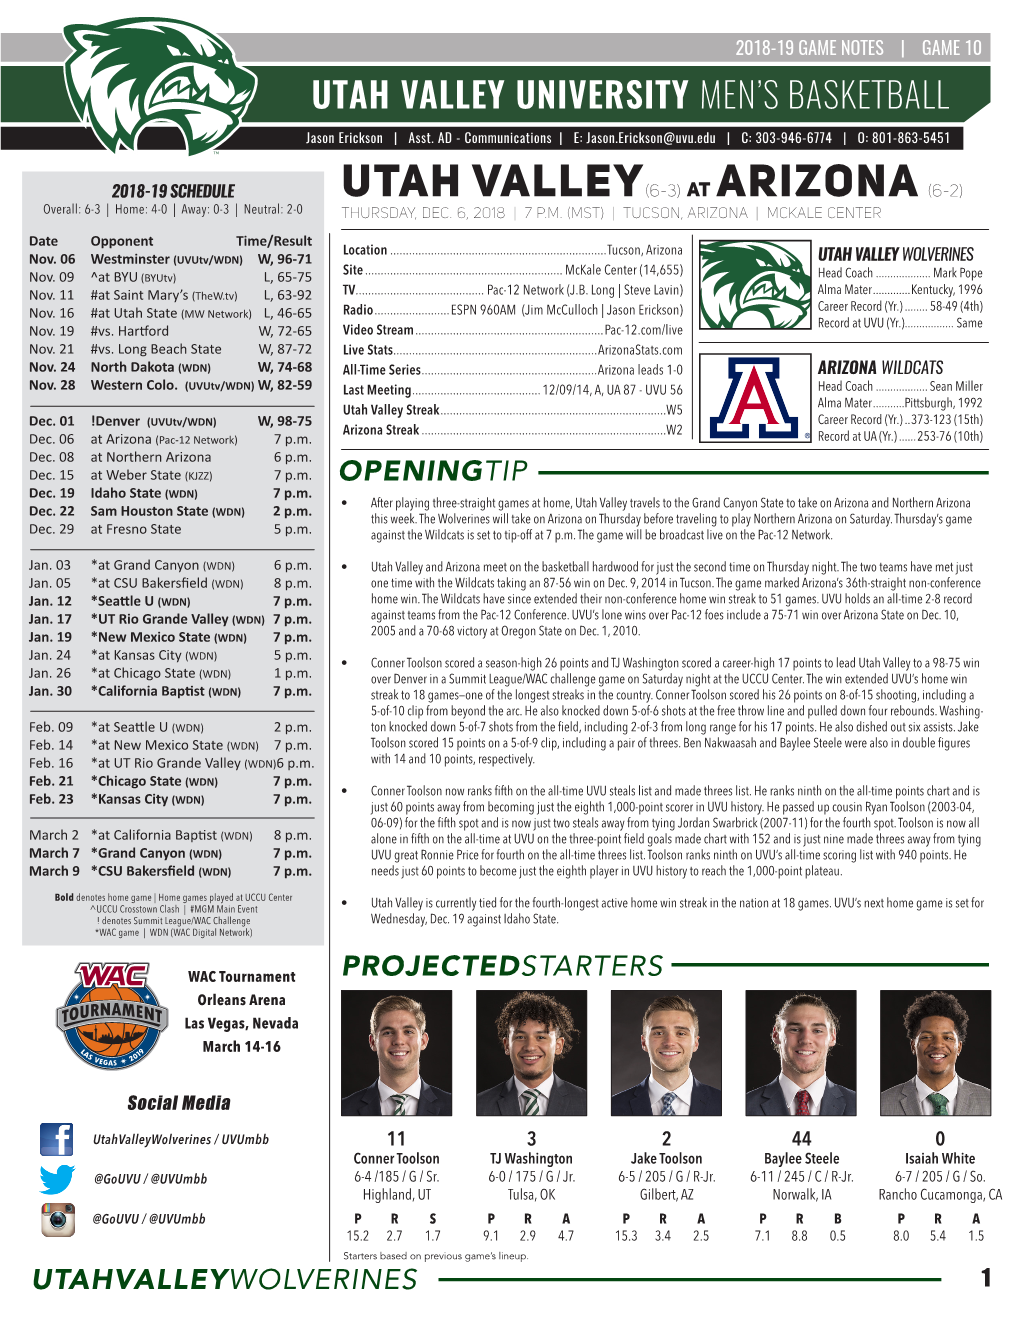 UTAH VALLEY(6-3) at Arizona (6-2) Overall: 6-3 | Home: 4-0 | Away: 0-3 | Neutral: 2-0 Thursday, Dec